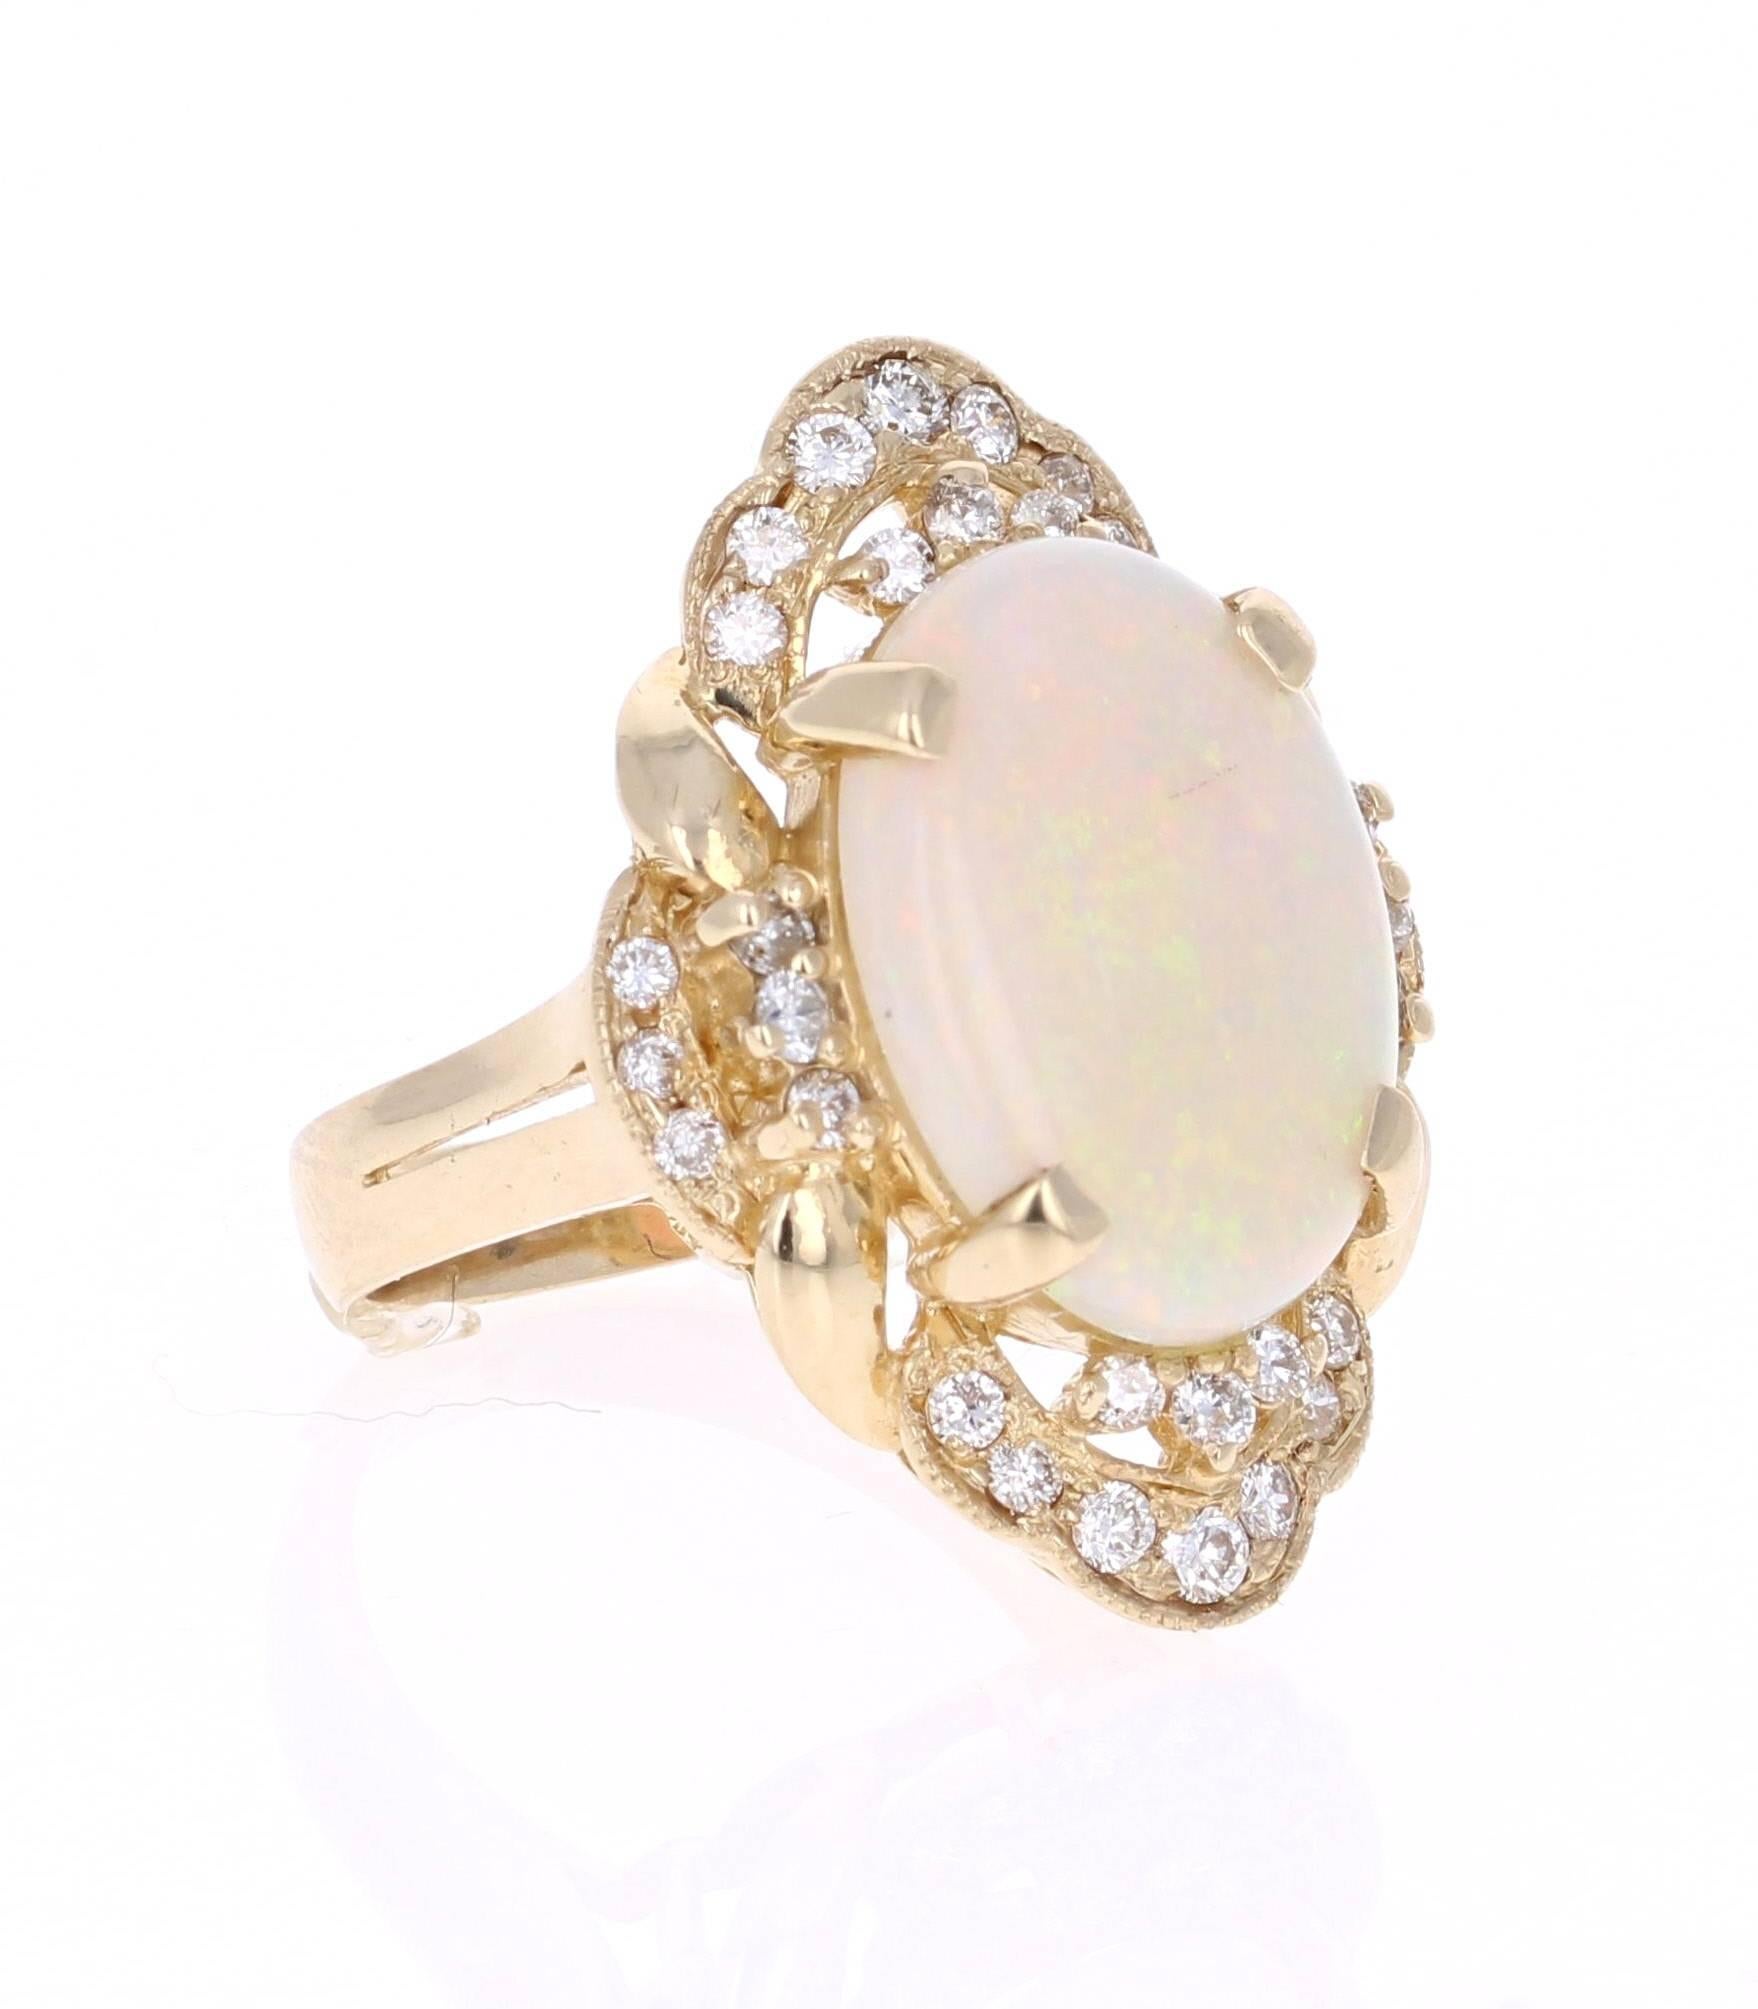 This gorgeous cocktail ring has a beautiful & large Oval Cut Australian Opal that weighs 5.25 carats and 32 Round Cut Diamonds that weigh 0.66 carats. The clarity and color of the diamonds are VS2-H.  The total carat weight of the ring is 5.91